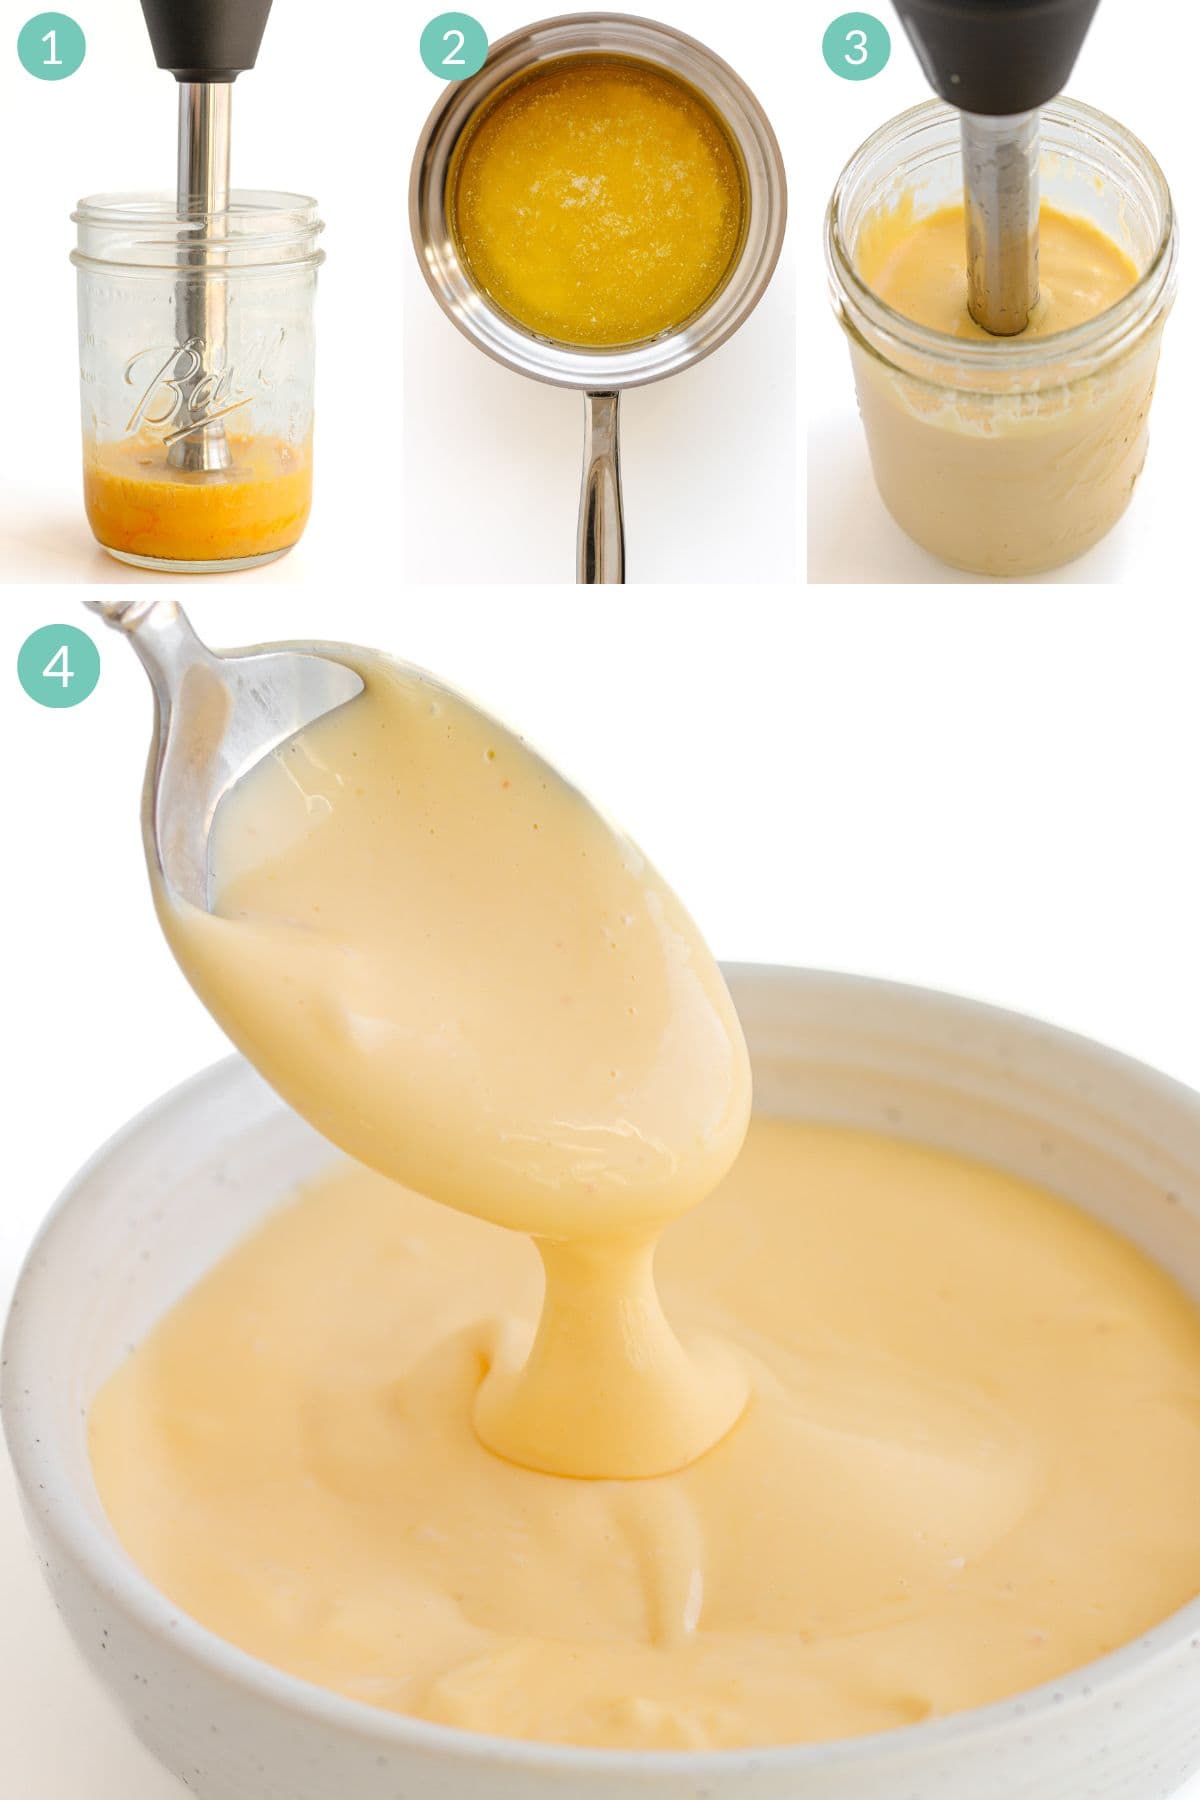 Numbered photo collage showing how to make immersion blender hollandaise sauce.